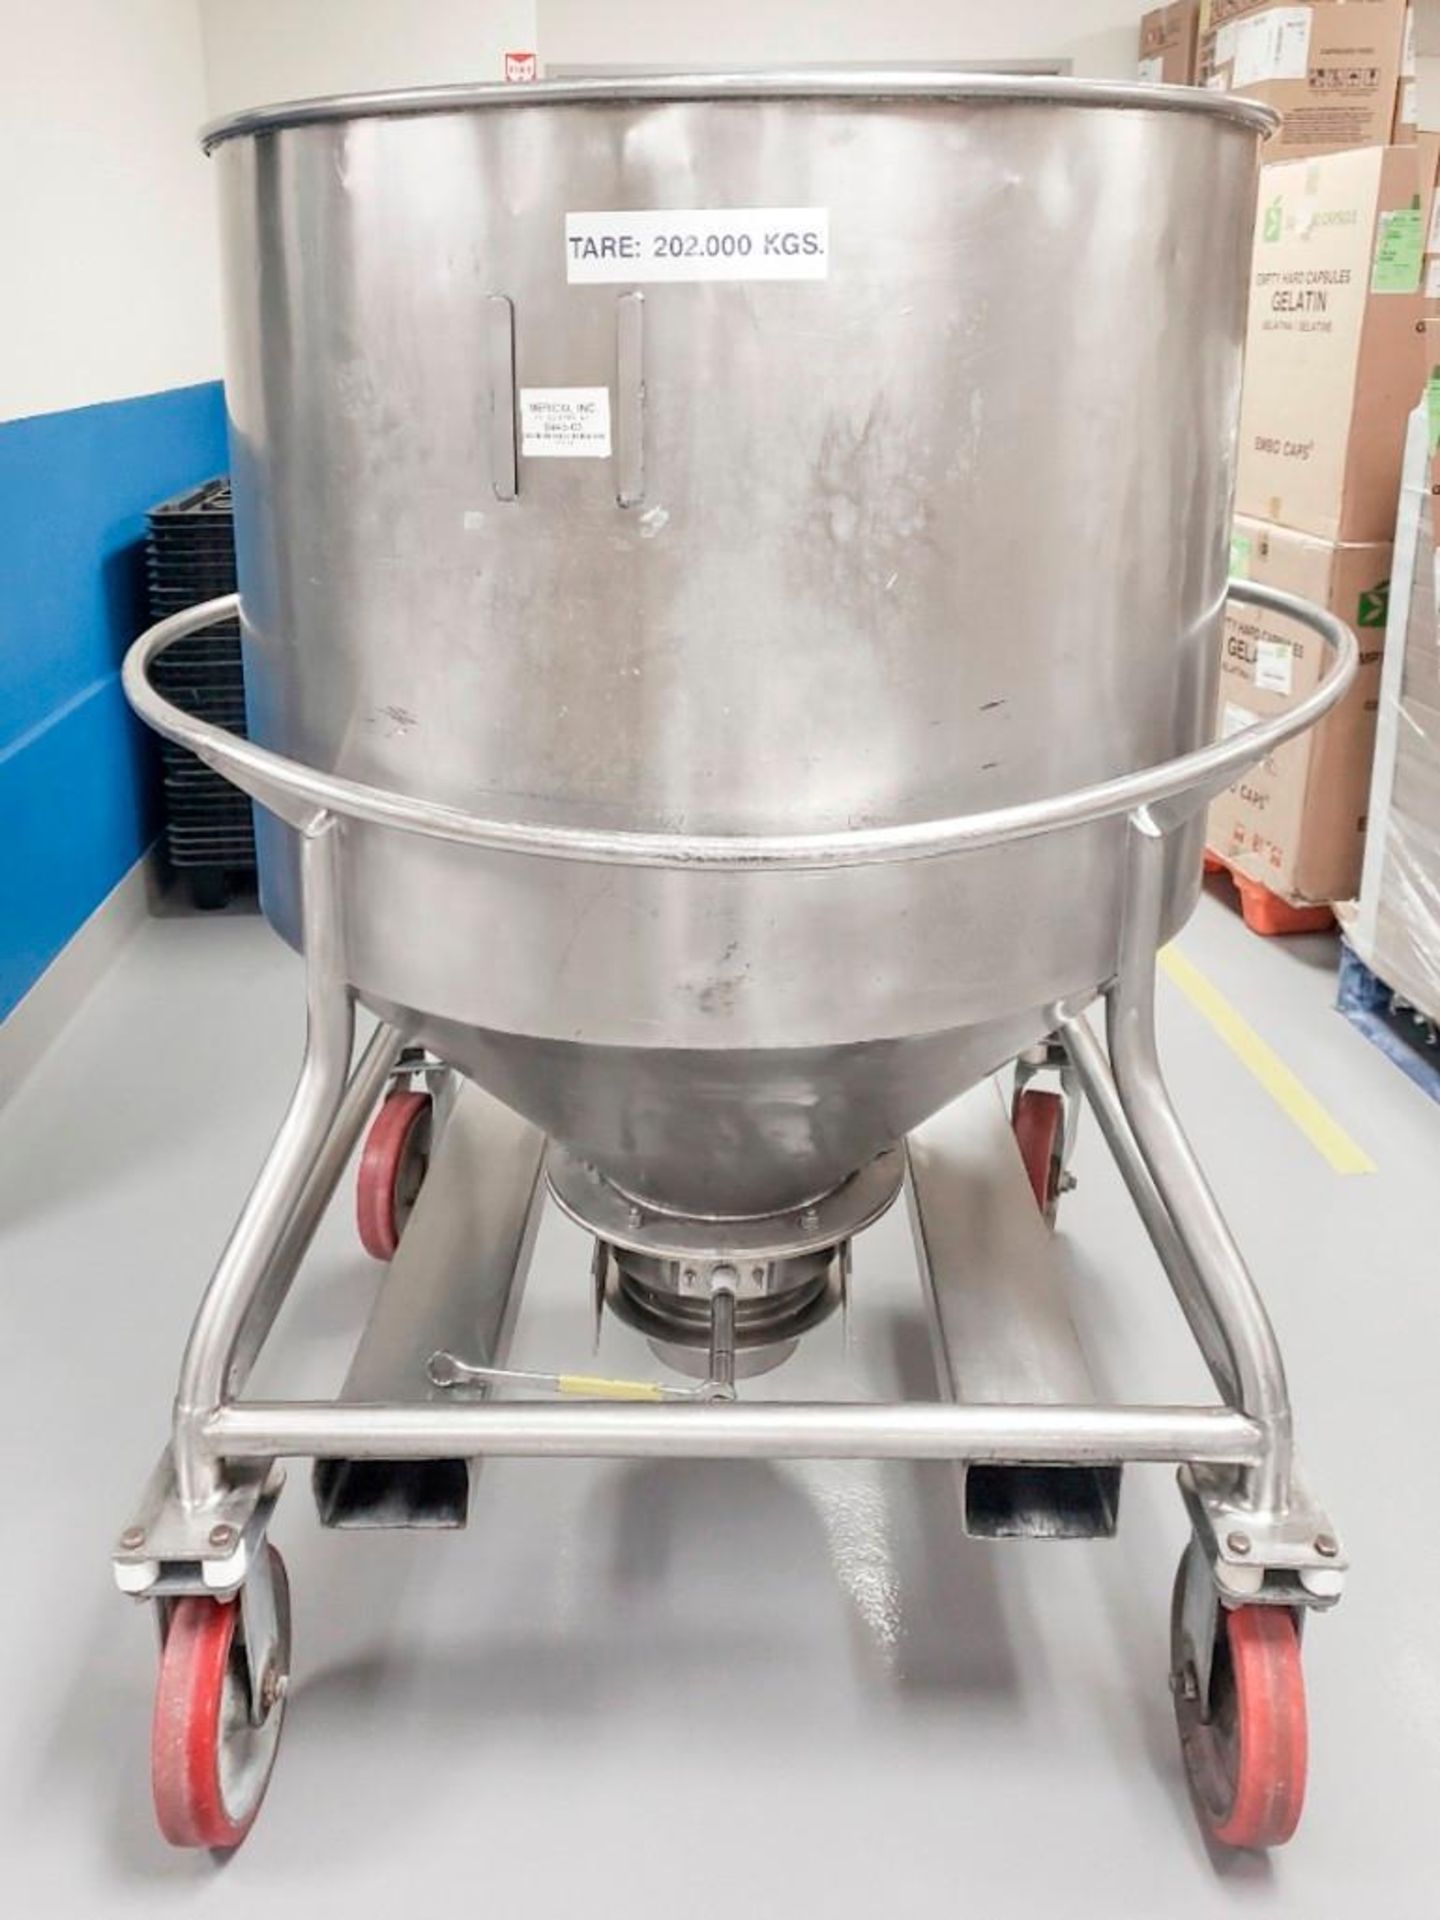 700Kg Capacity Charge Kettle - Image 6 of 12